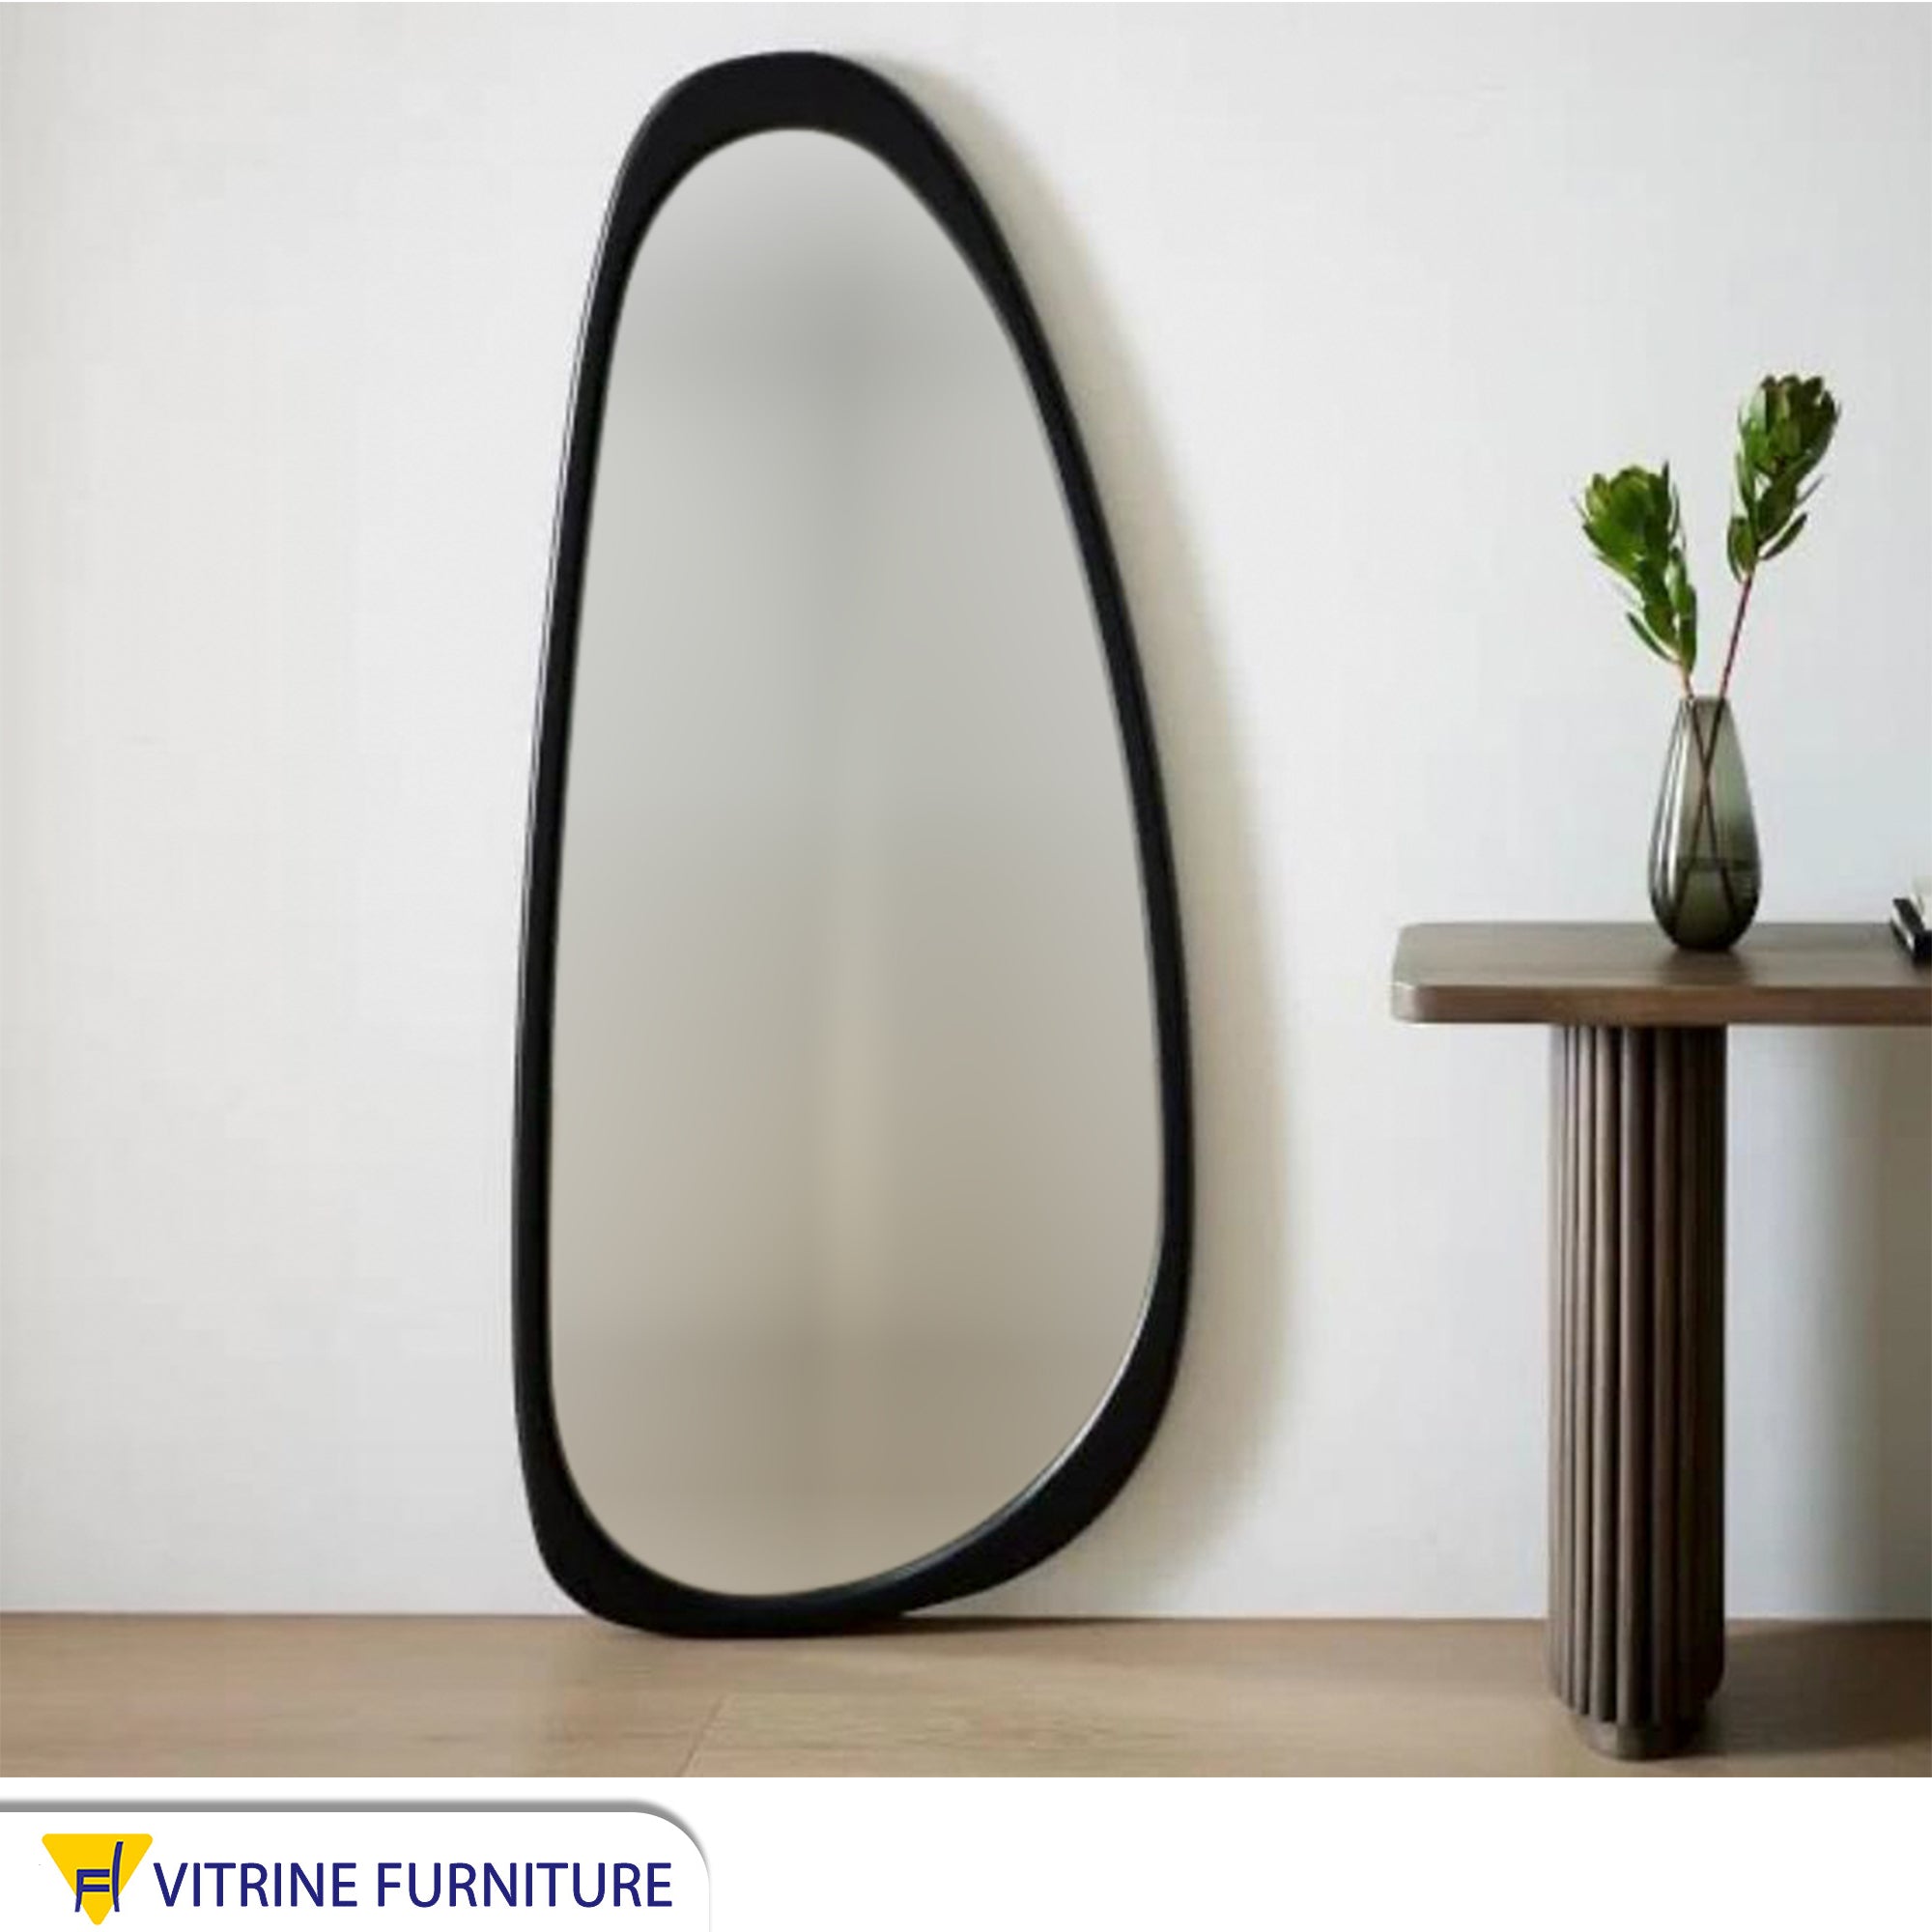 Modern aesthetic mirror 60 * 160 with a black frame